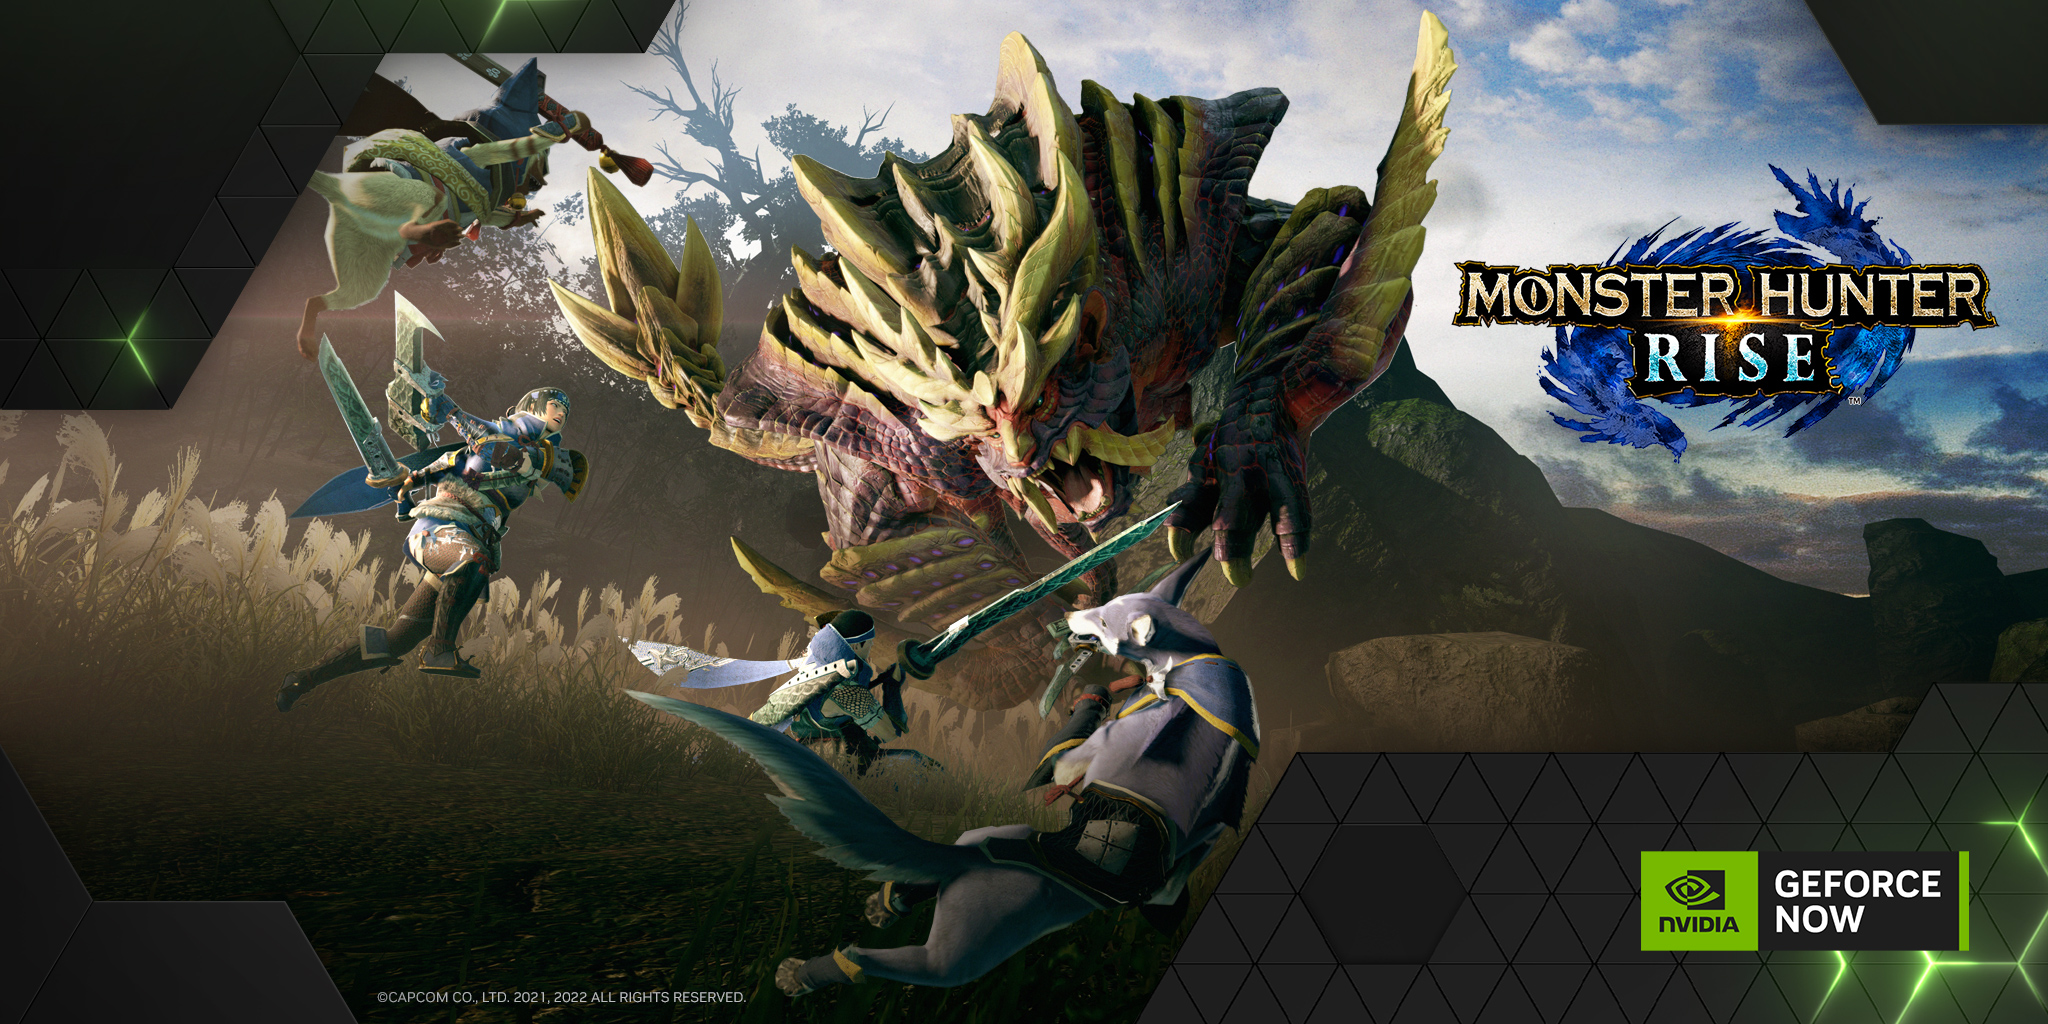 GeForce NOW will receive Monster Hunter Rise and its Sunbreak expansion